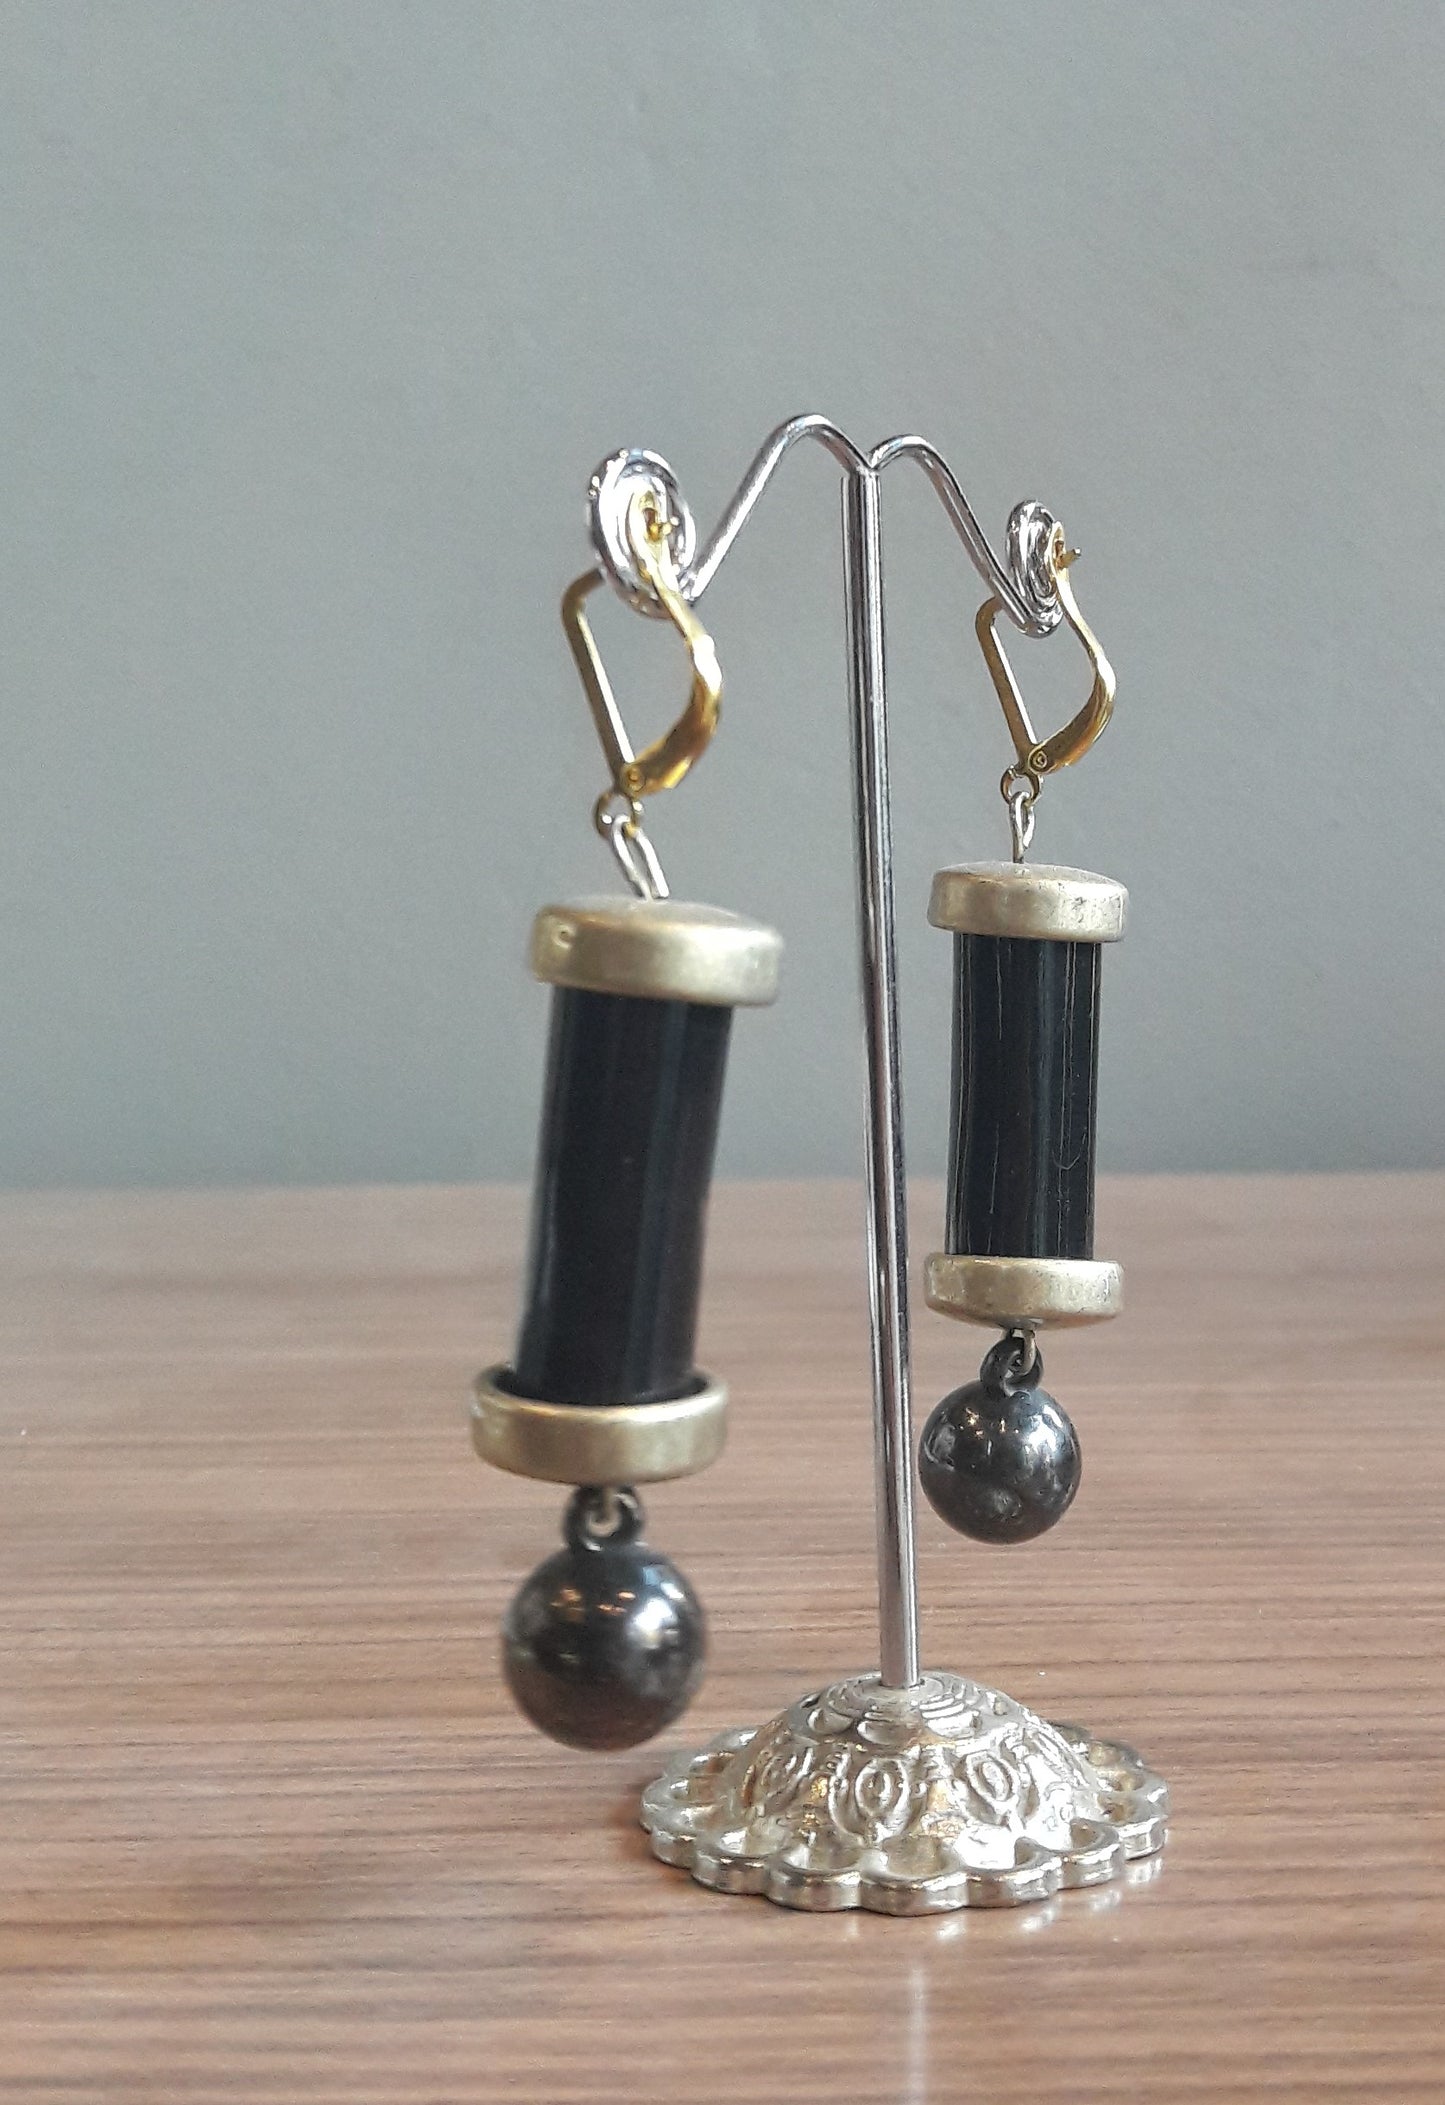 thecollective Handmade Upcycled Deco Earrings